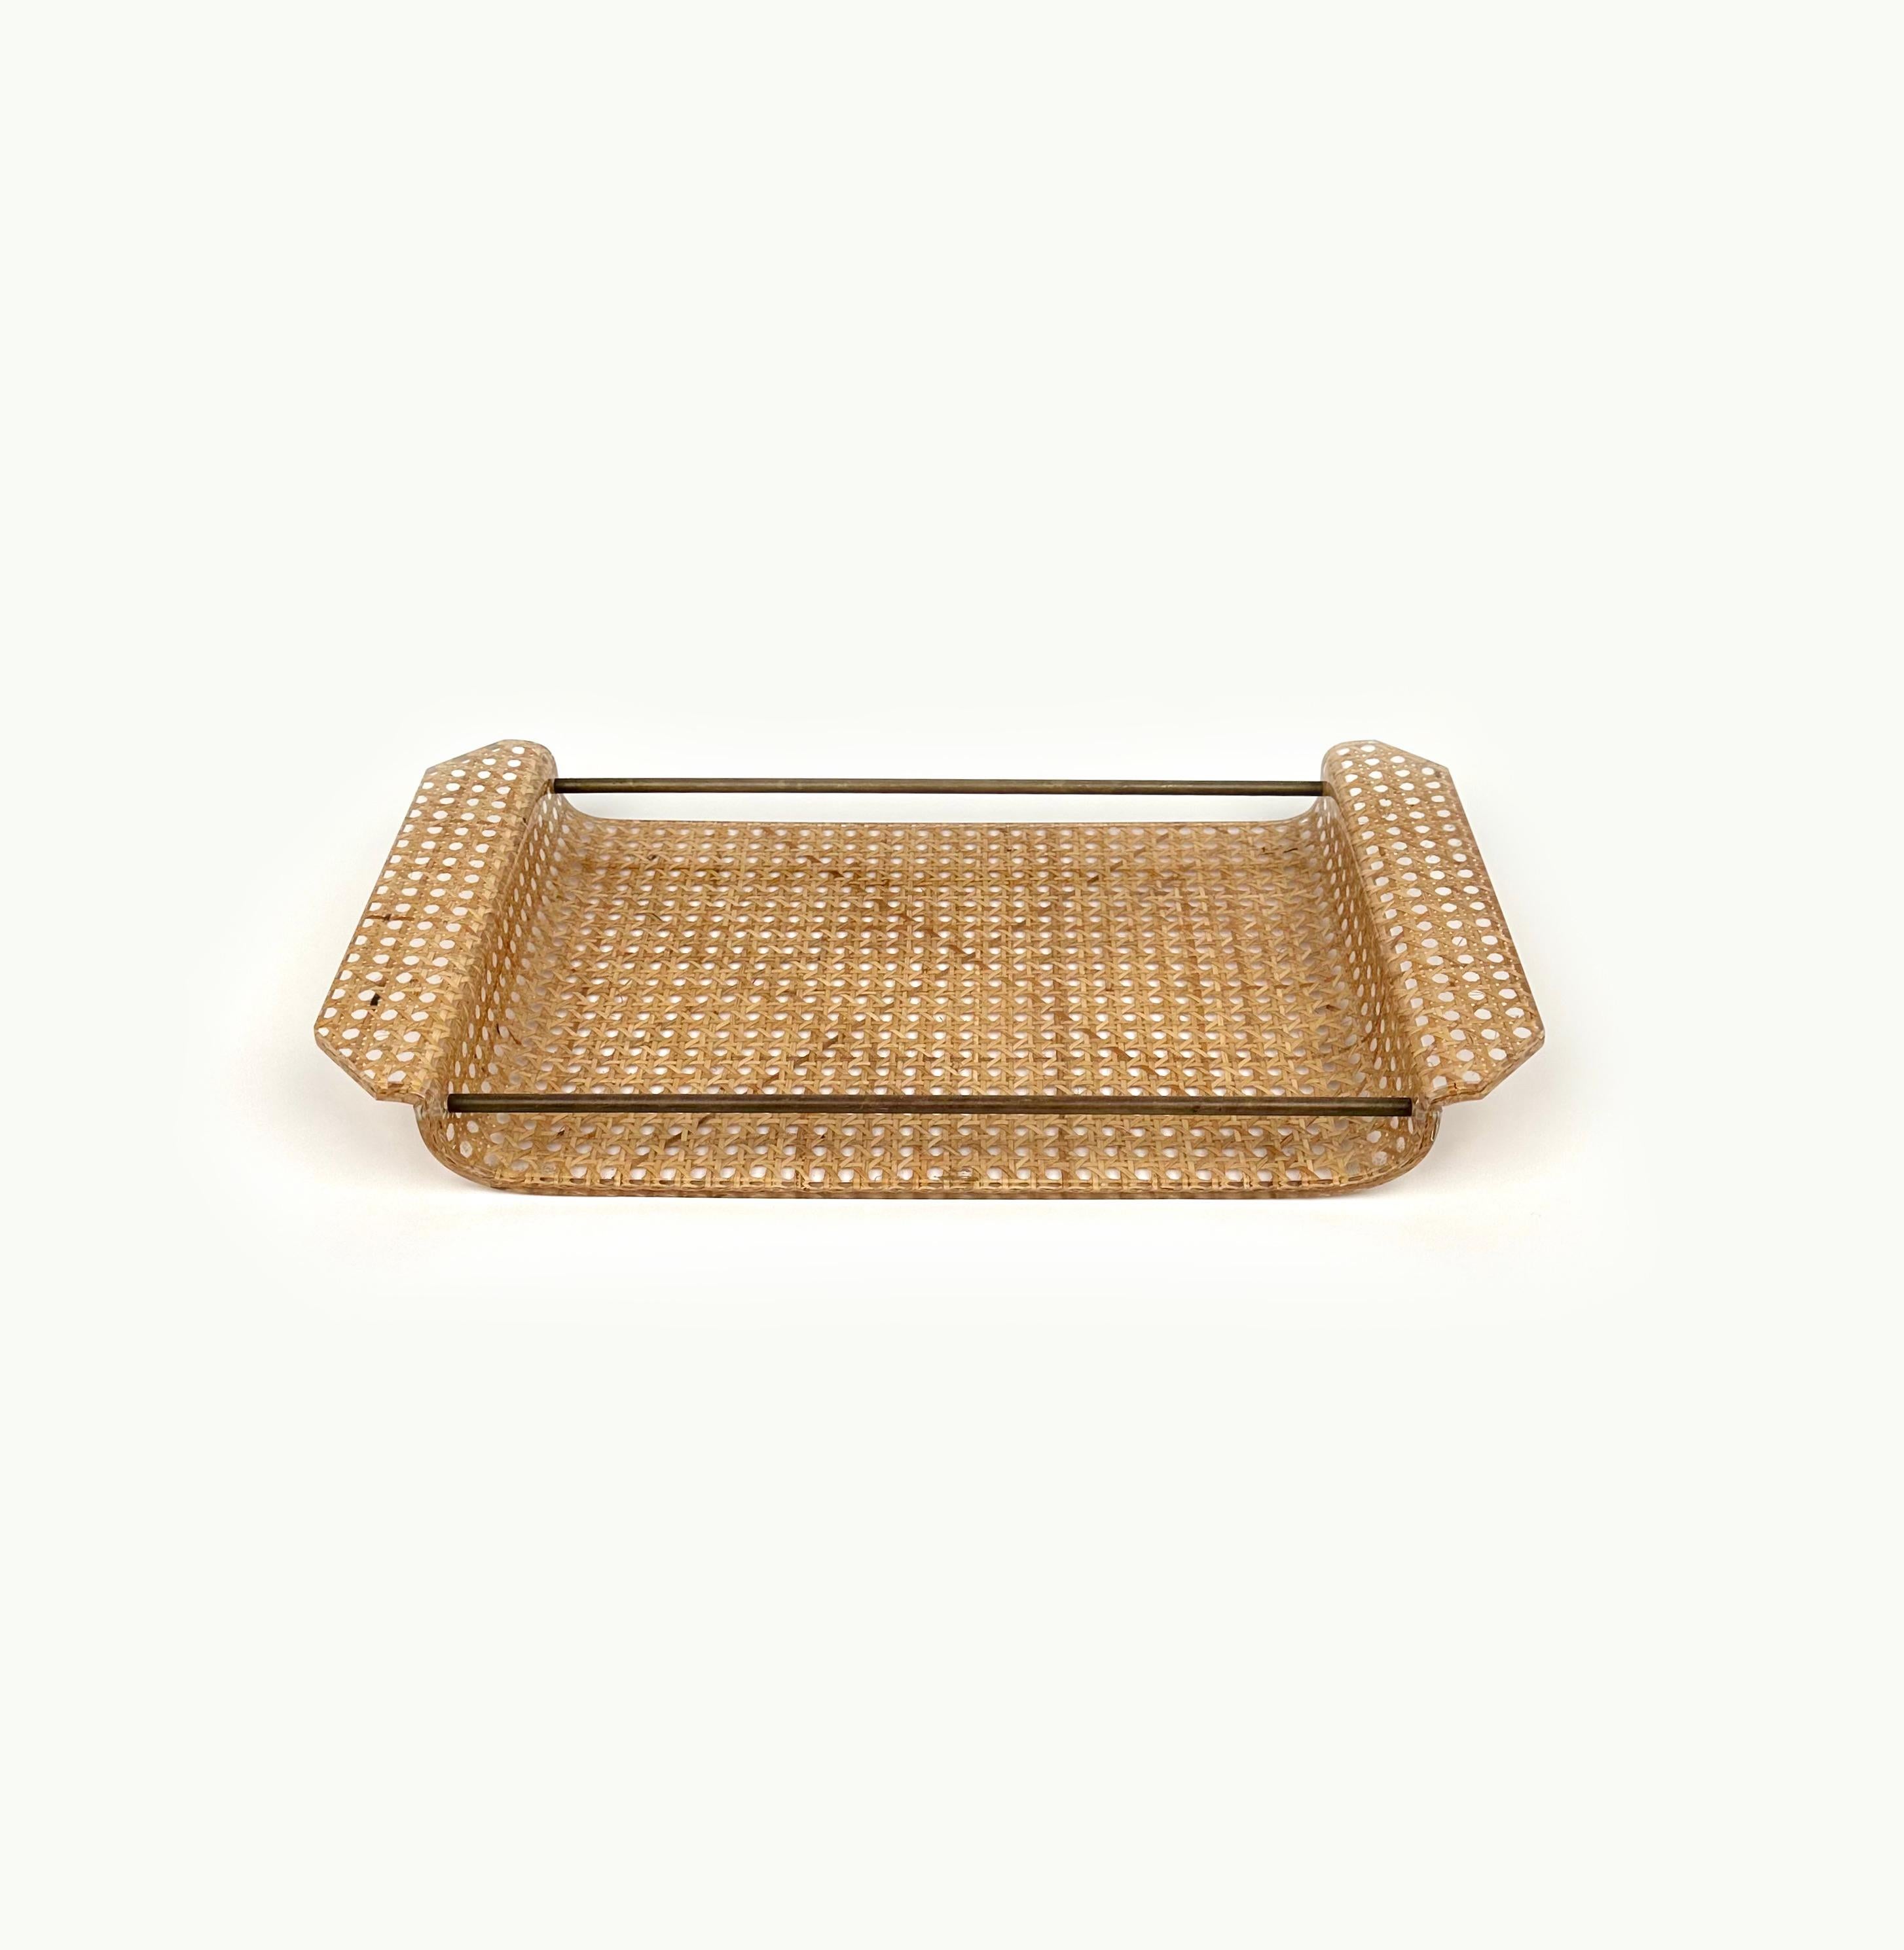 Mid-Century Modern Serving Tray Lucite, Rattan and Brass Christian Dior Style, Italy, 1970s For Sale